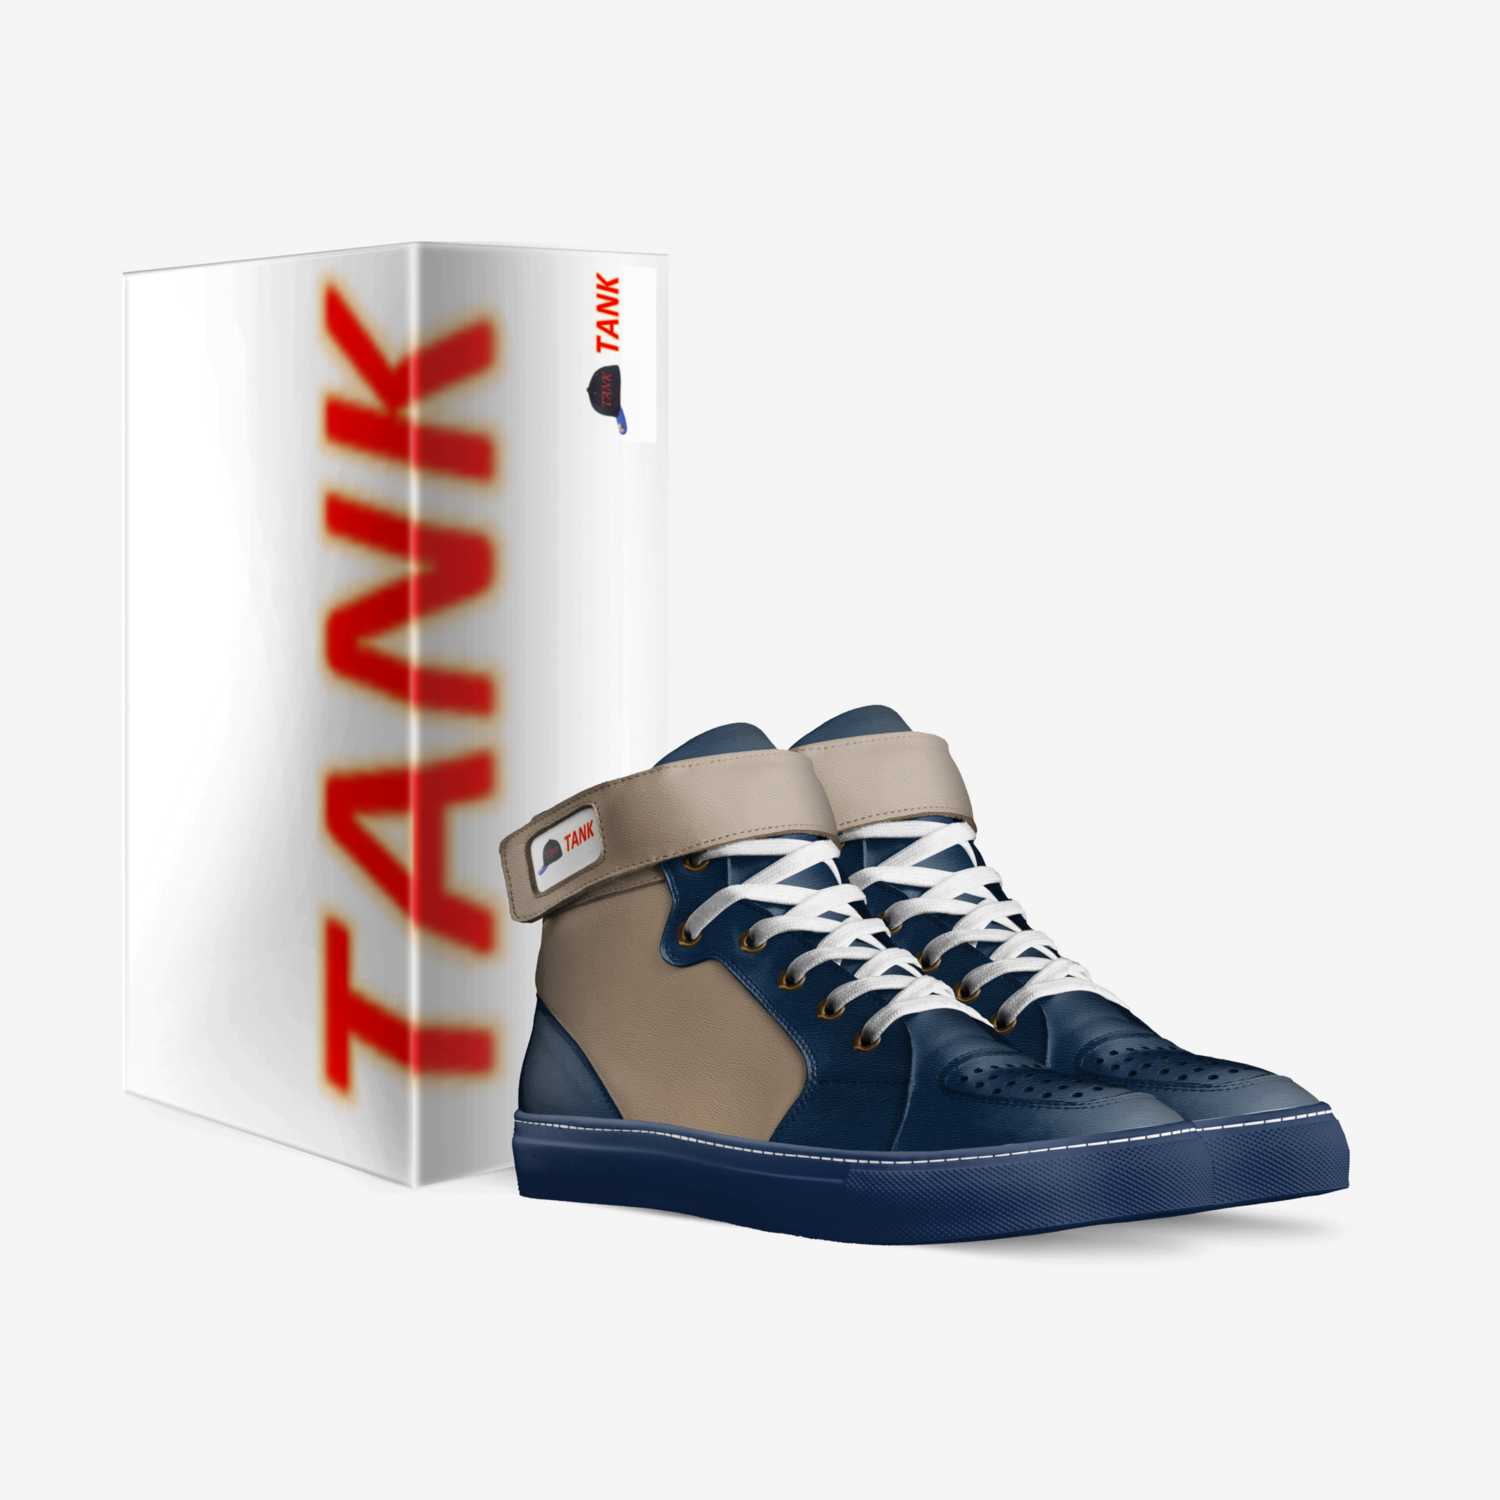 TANK custom made in Italy shoes by Sandeep | Box view